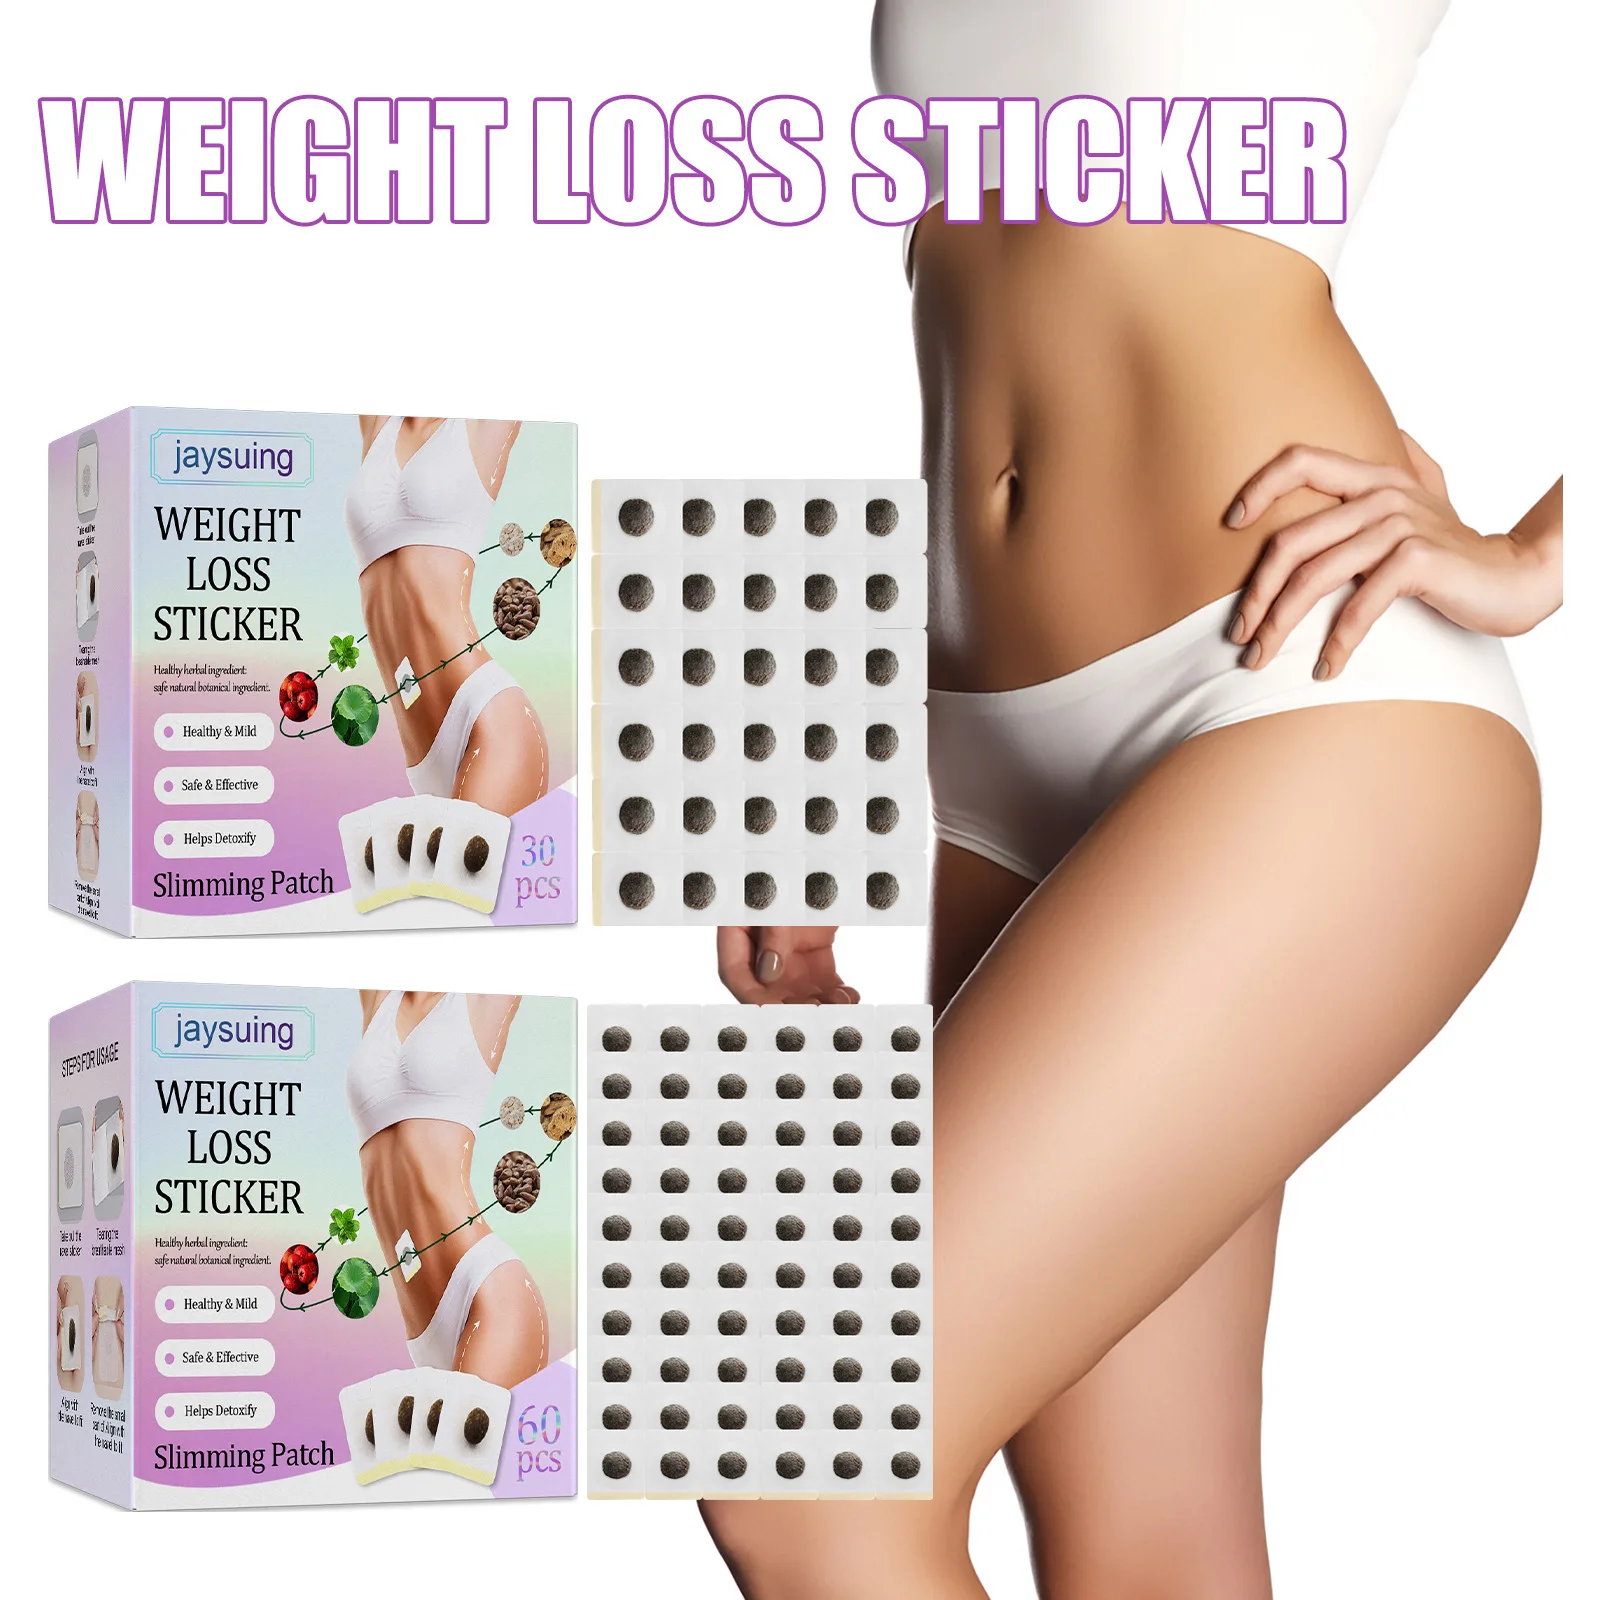 Body Belly Detox Slimming Belly Button S 60pcs/box of New Fat Burning Stickers Belly Stickers Chinese Medicine Slimming Products